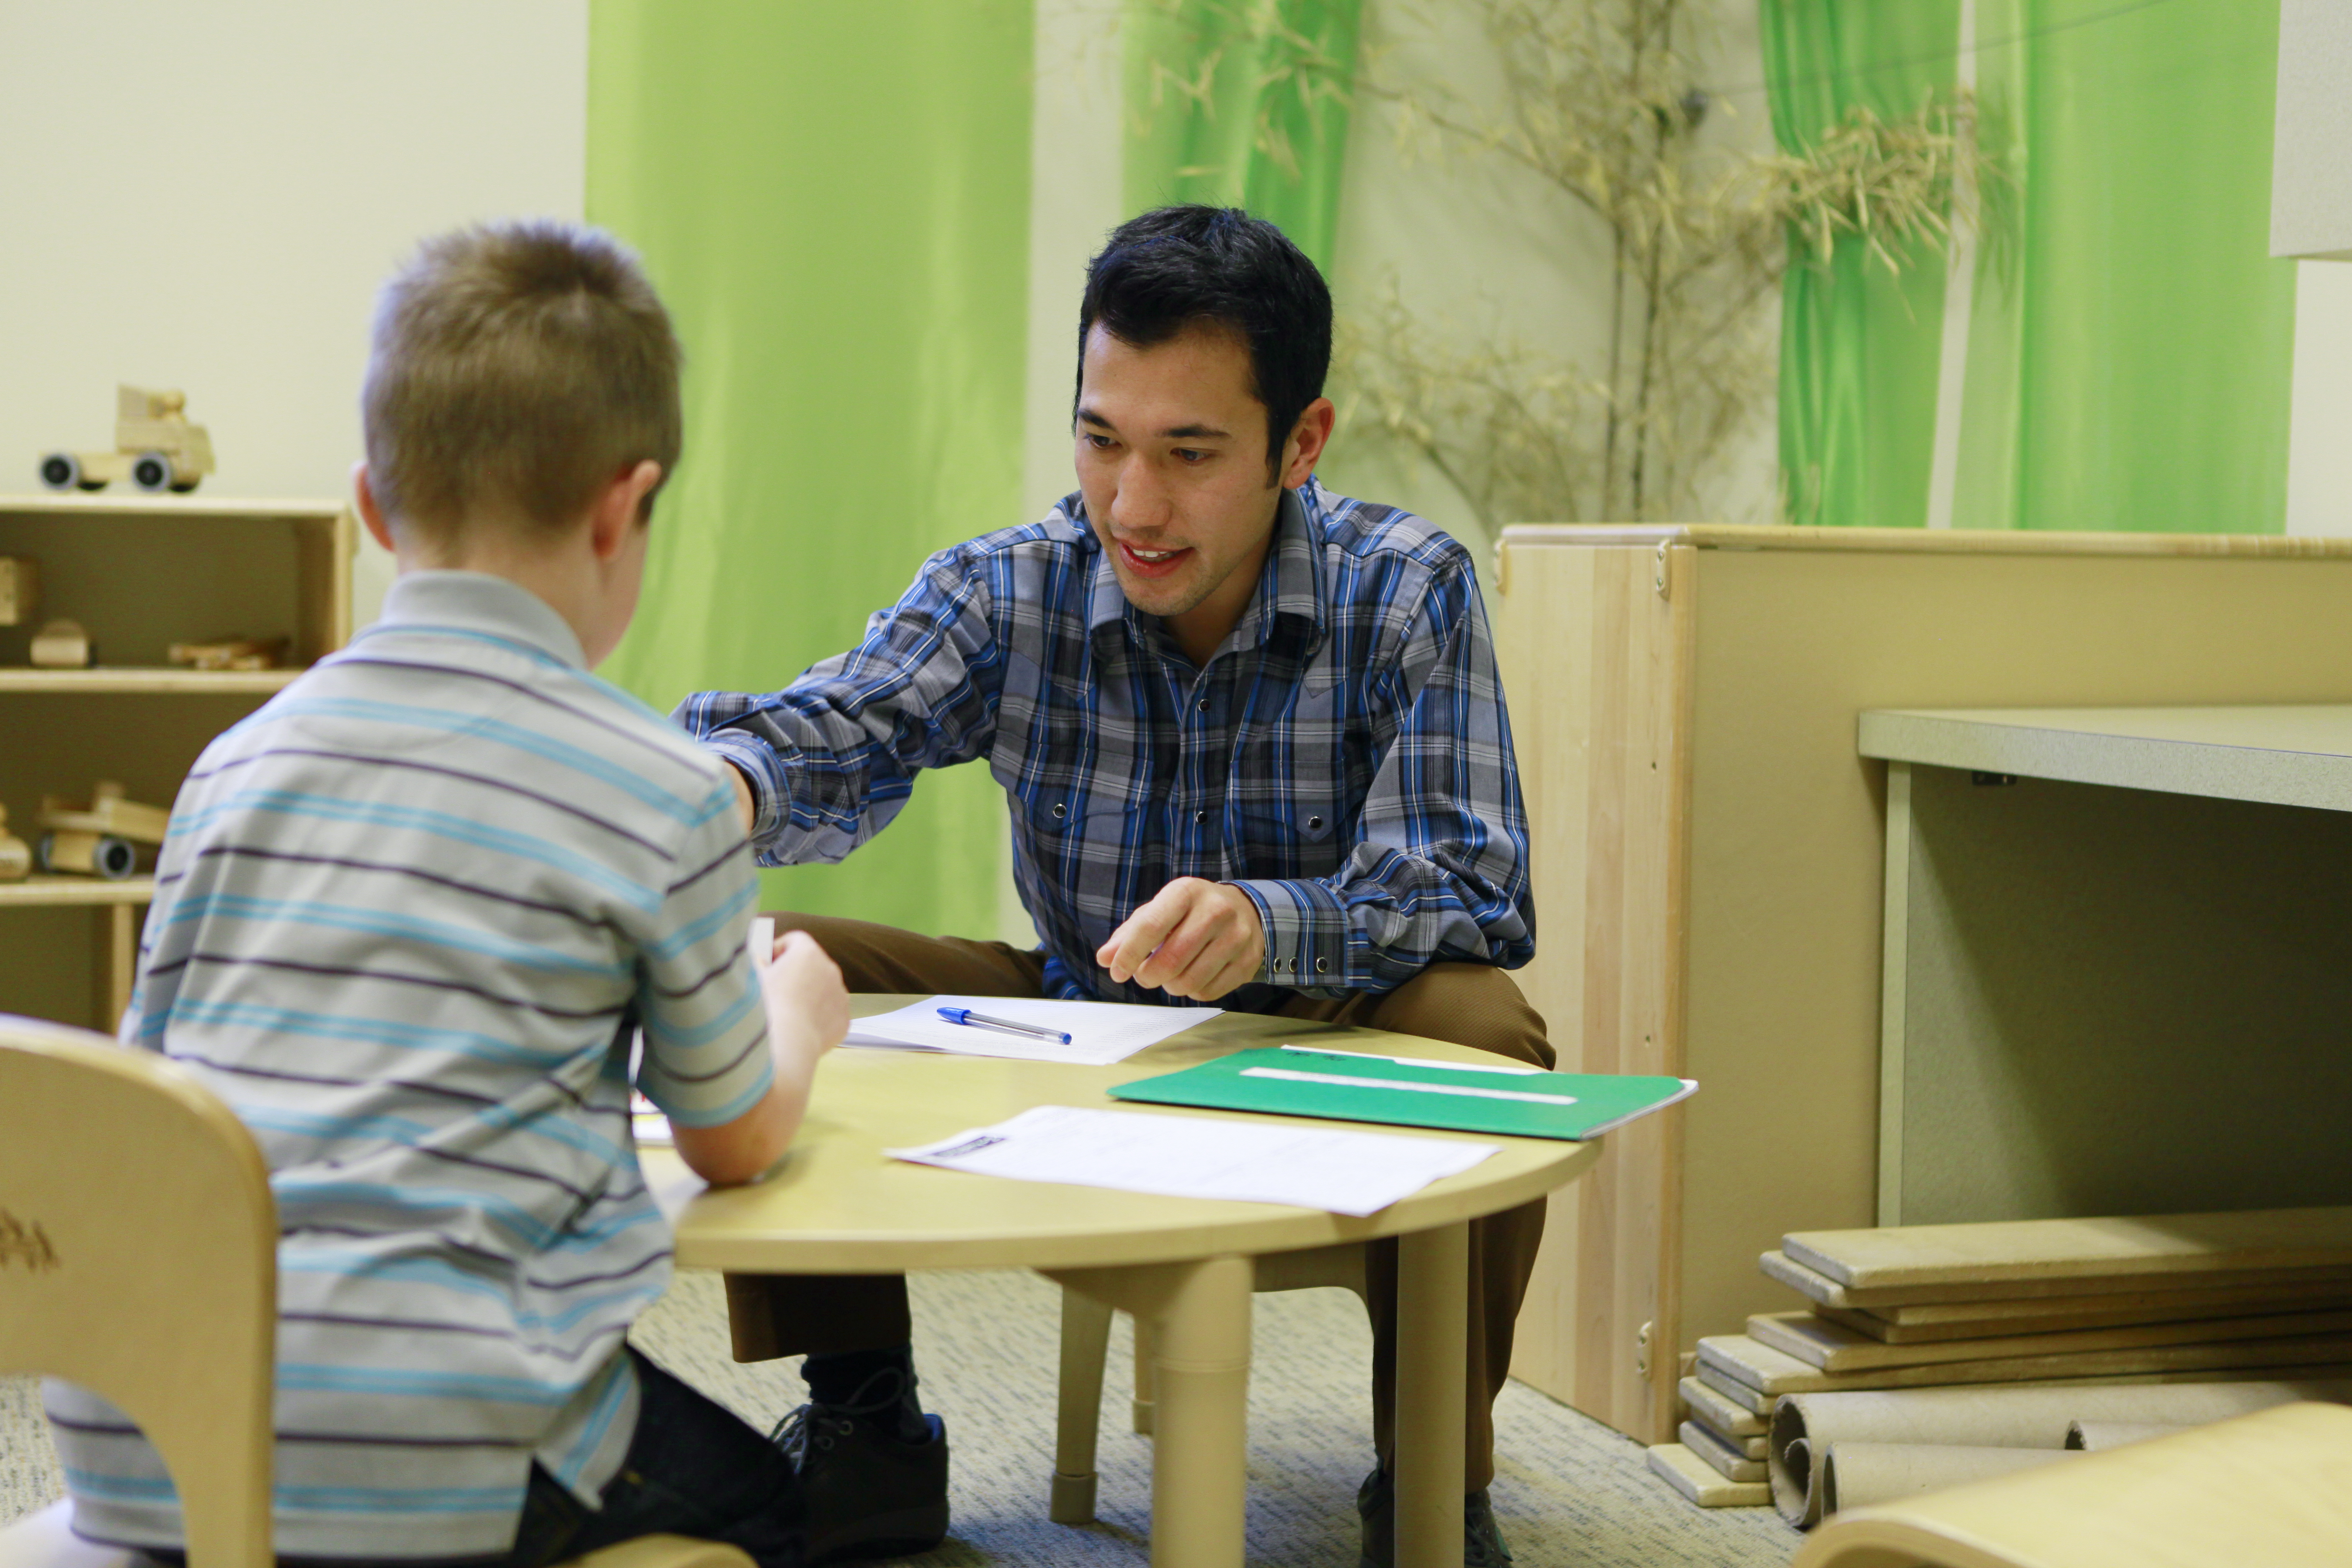 A speech-language pathology student works with a young child in a pediatric clinical setting.